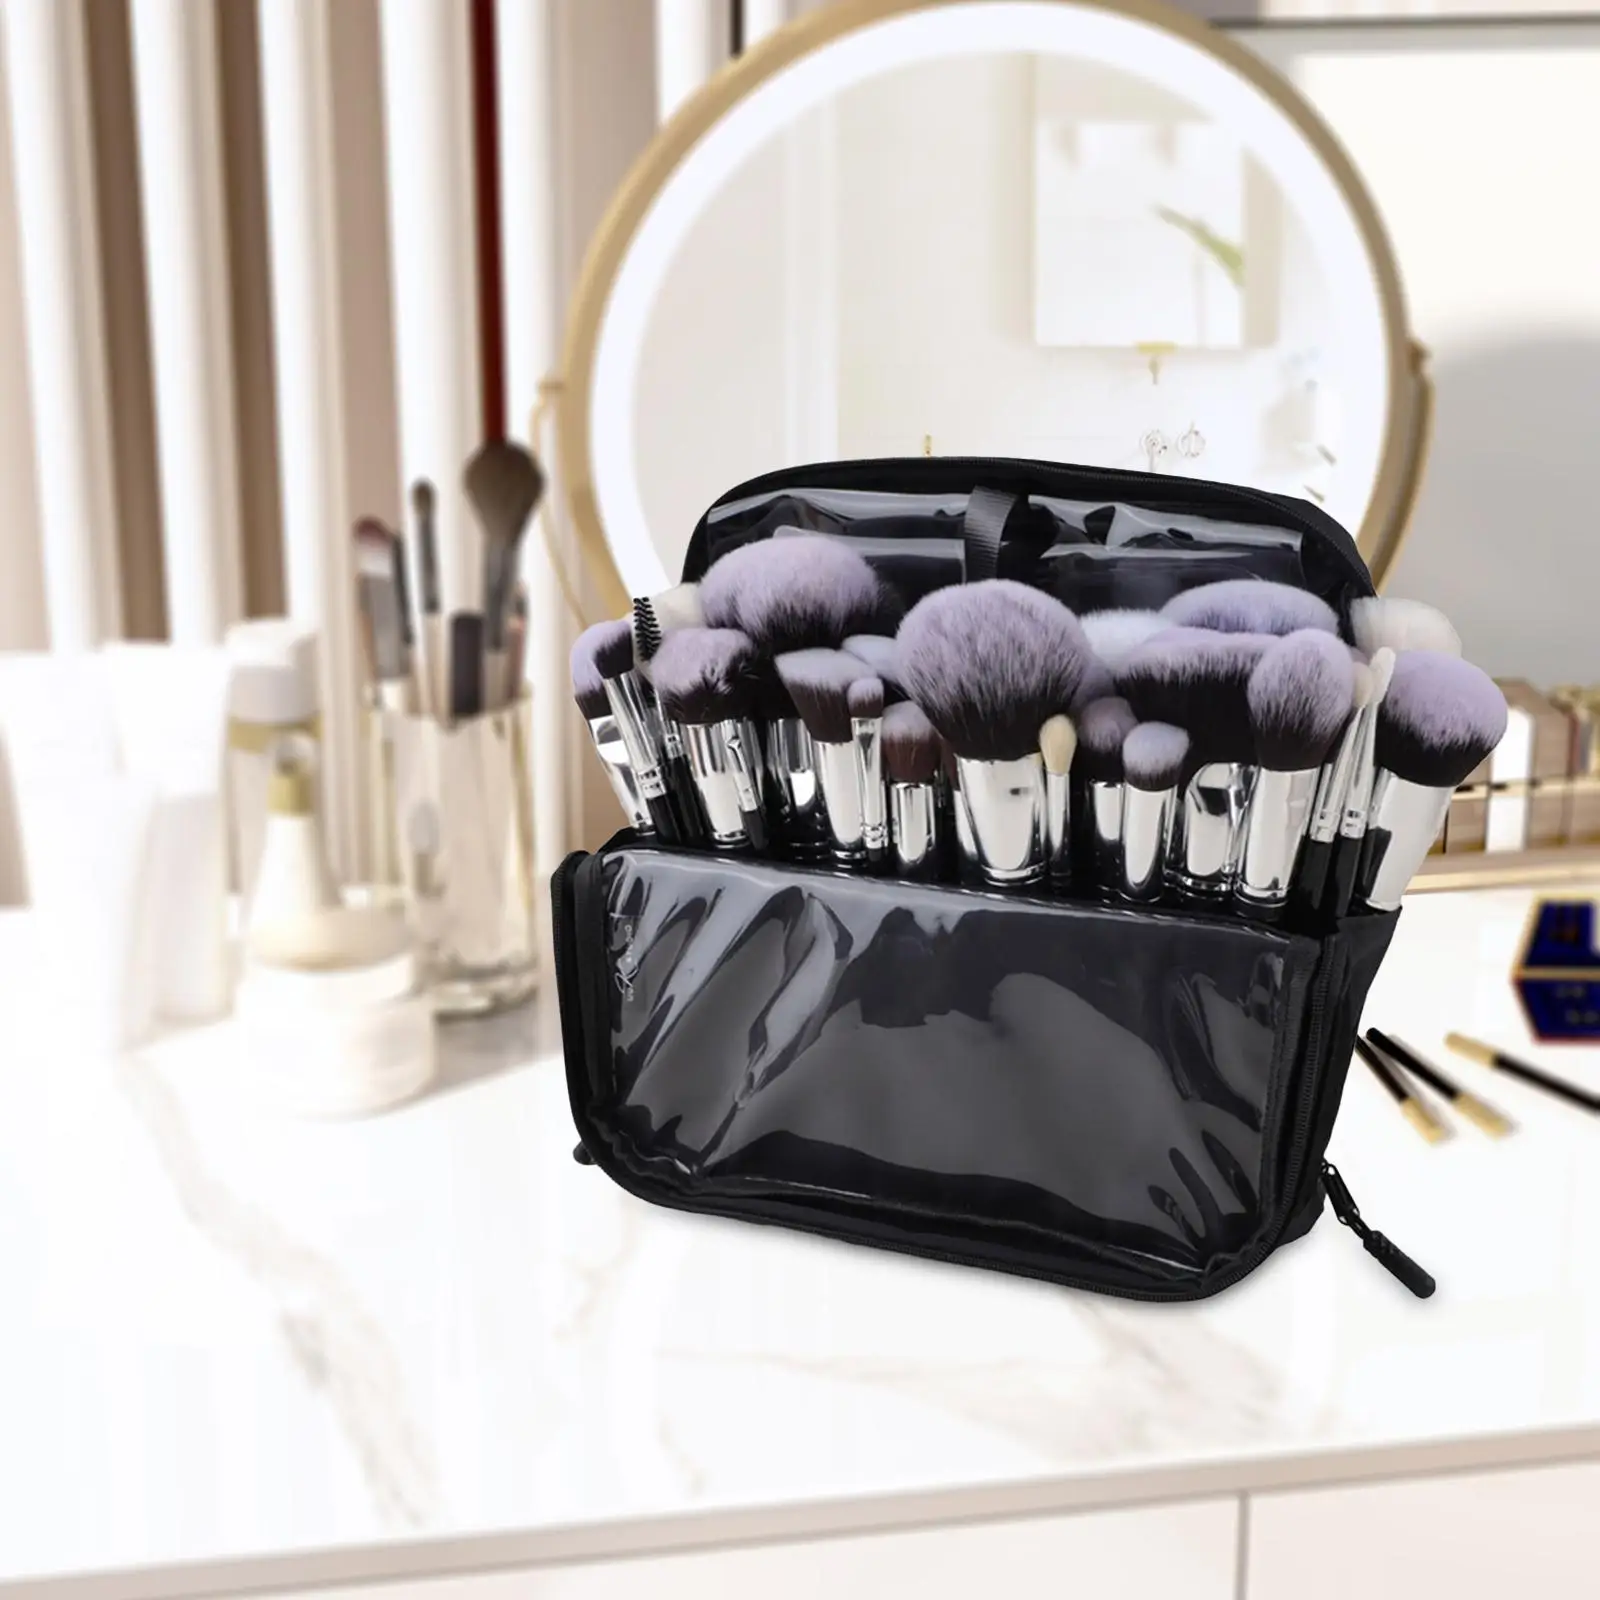 Makeup Brush Case Foldable Can Hold 100 Brushes Stand up Zipper Design Cosmetic Bag Pouch for Eyeshadow Brush Makeup Artists